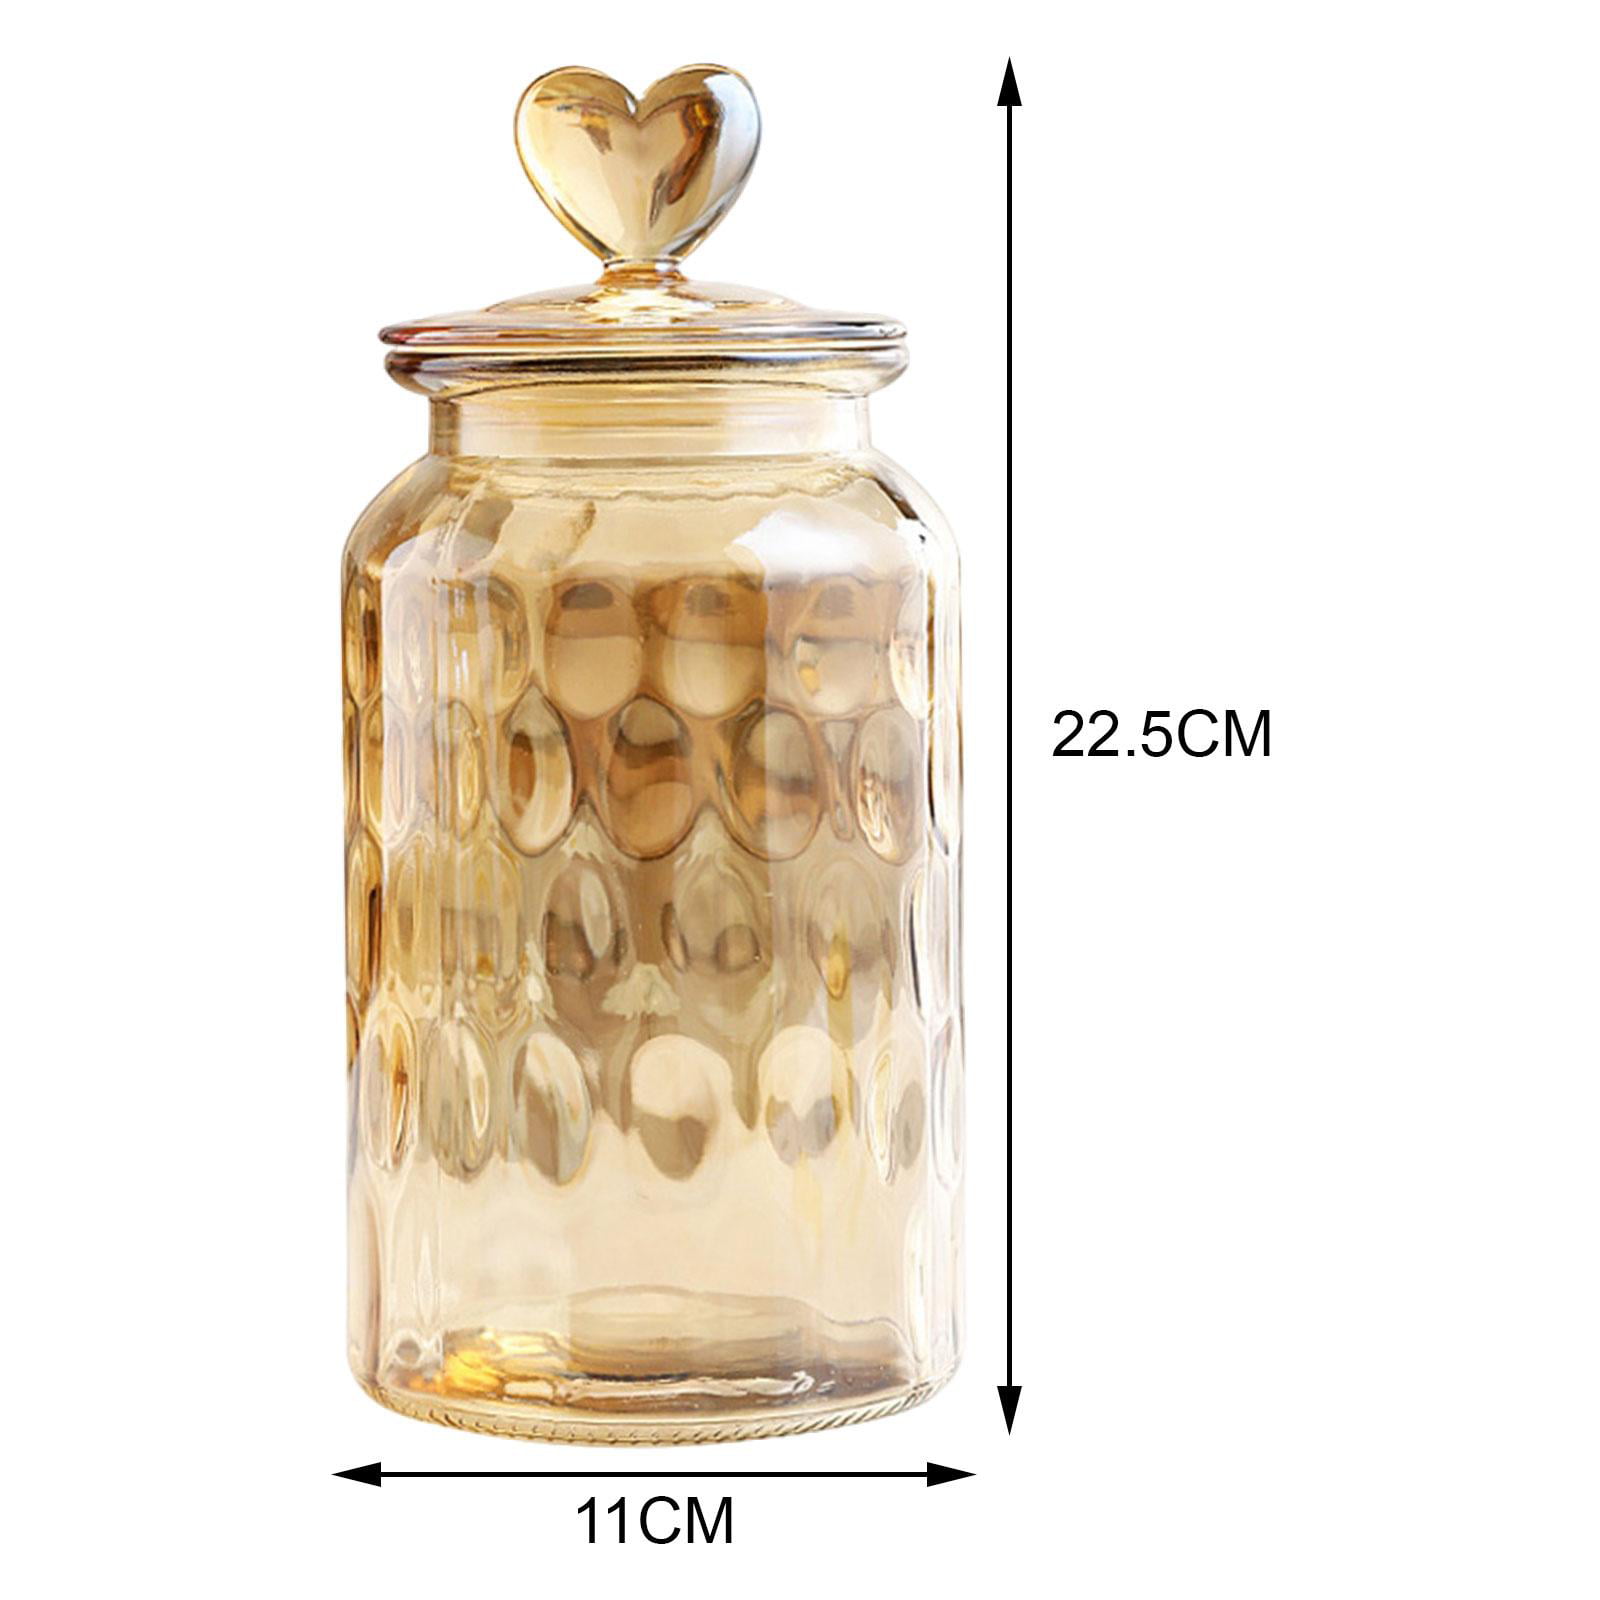  14oz/400ml Clear Glass Food Storage Containers Set Airtight  Food Jars with Bamboo Wooden Lids Kitchen Canisters For Sugar, Candy,  Cookie, Rice and Spice Jars - Set of 12 : Home 